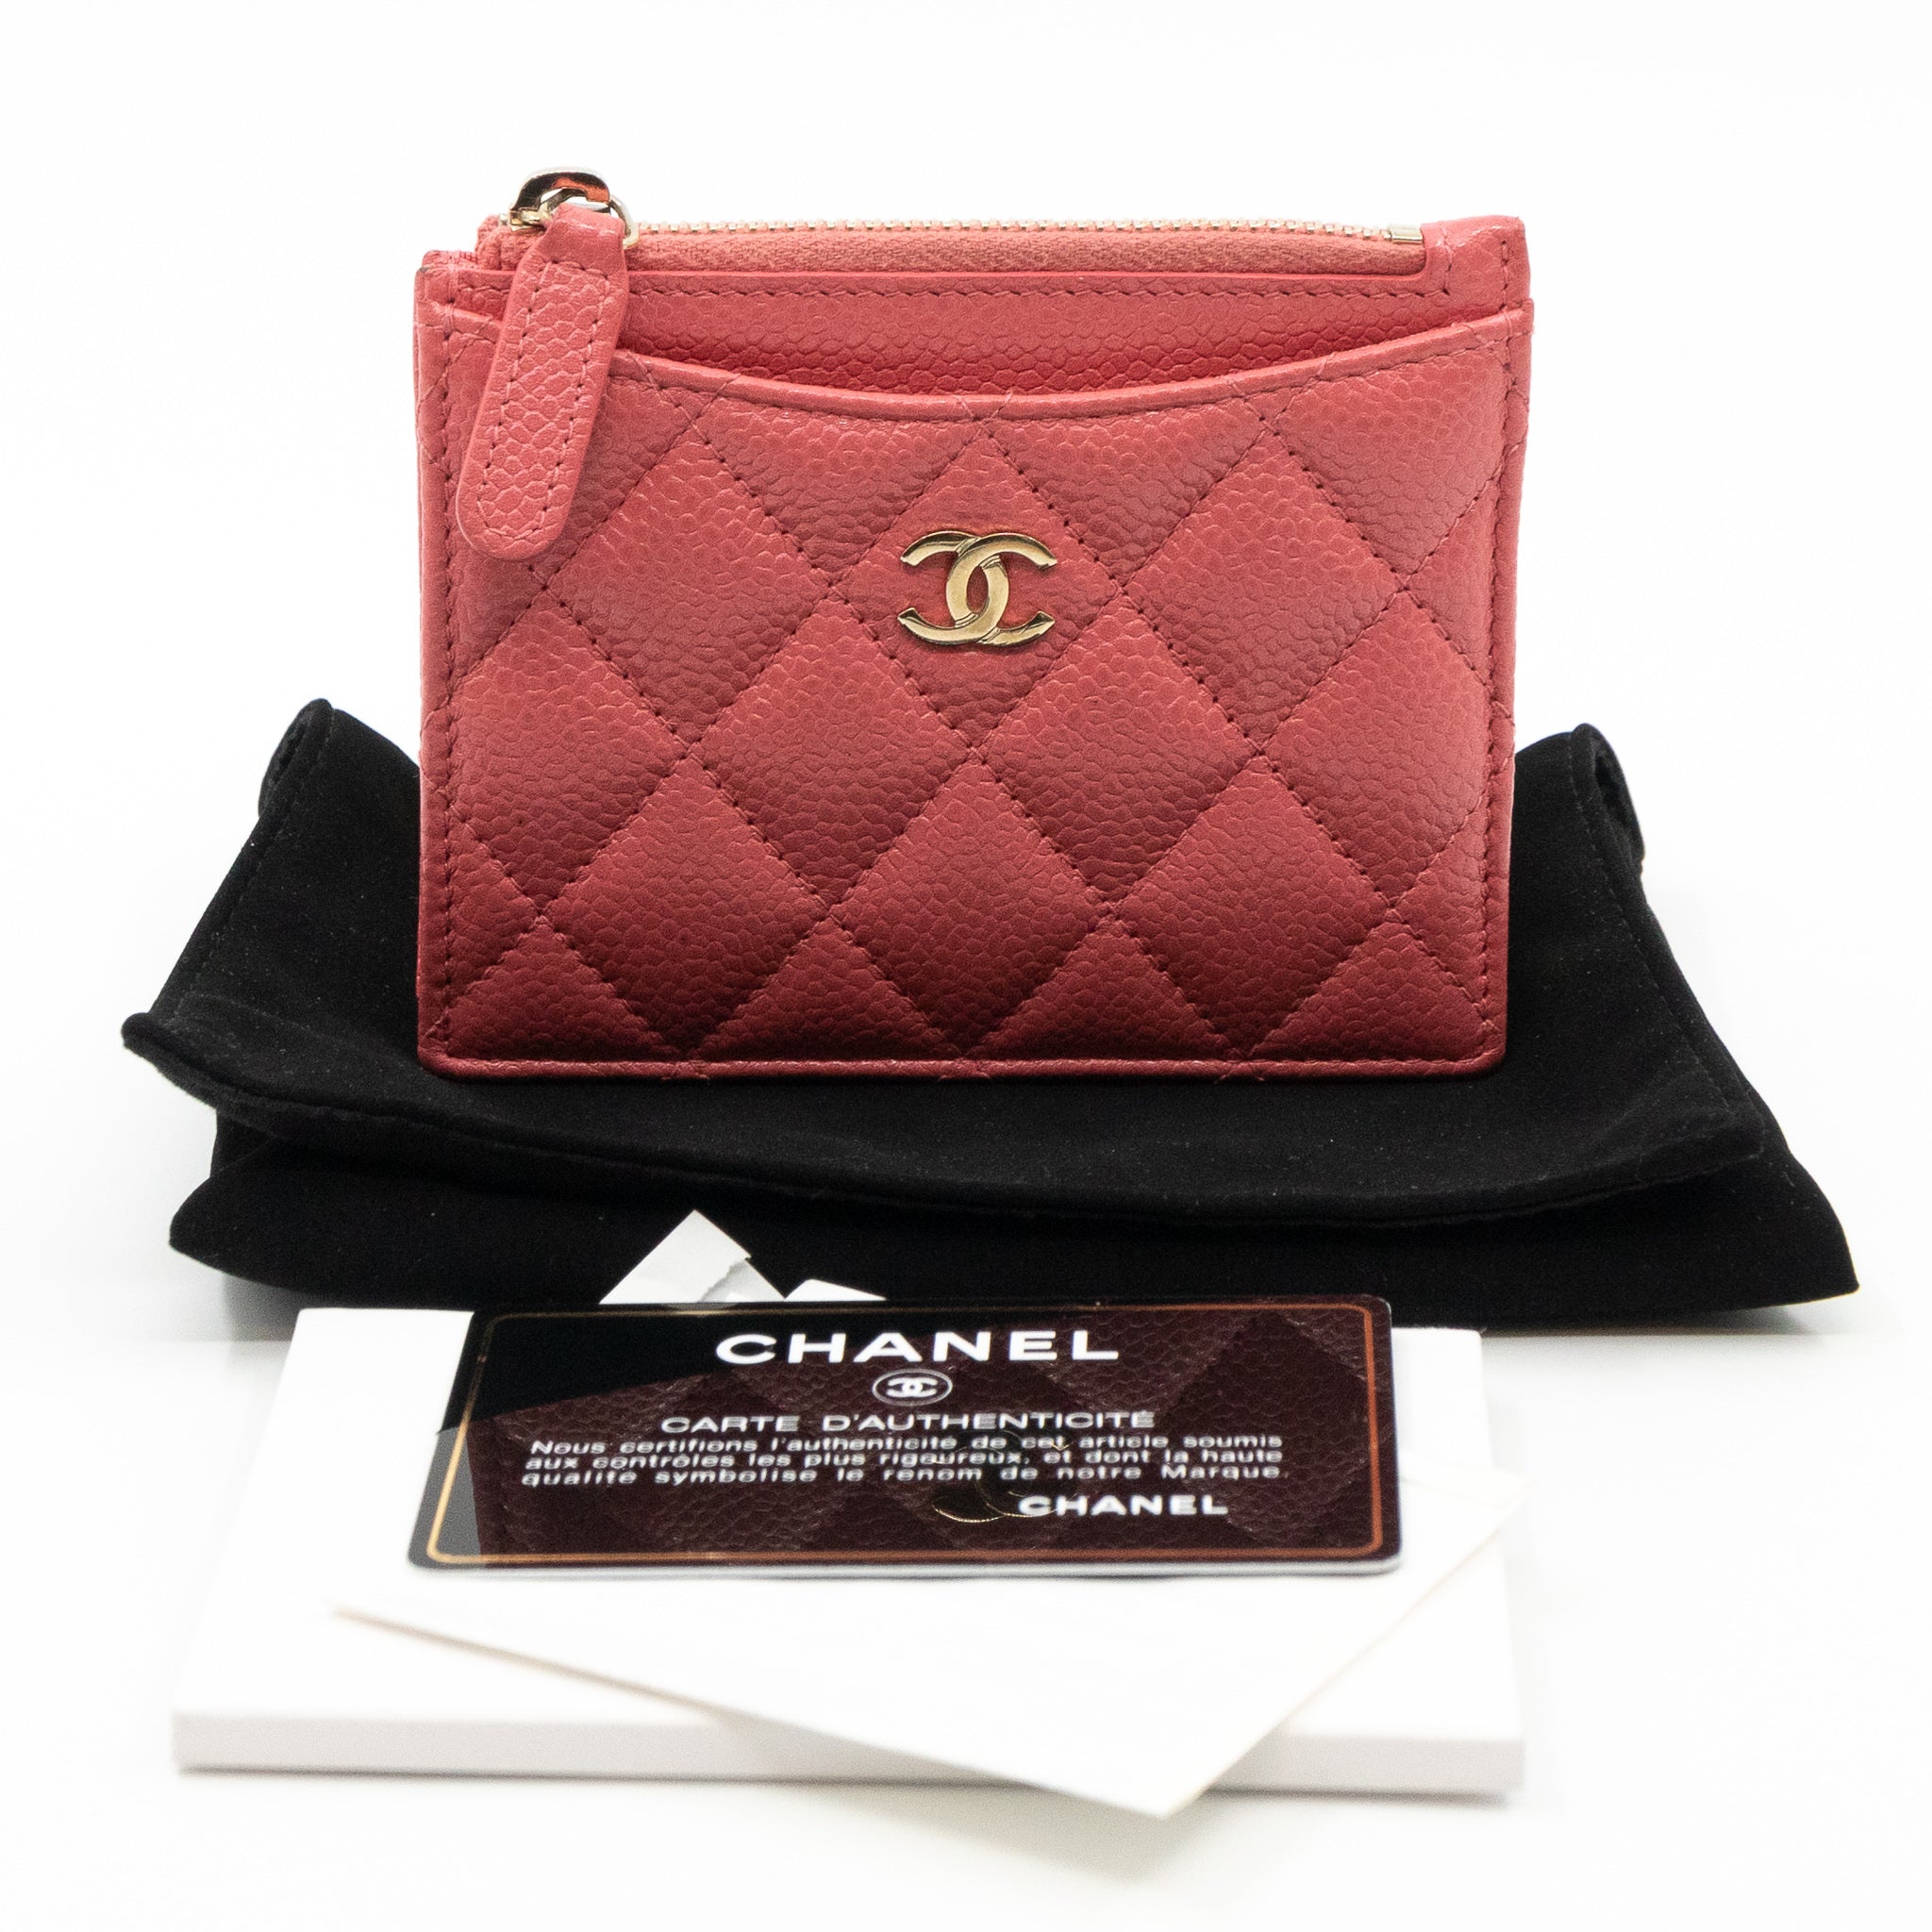 Chanel Crystal Woven Zip Around Card Holder in Pink